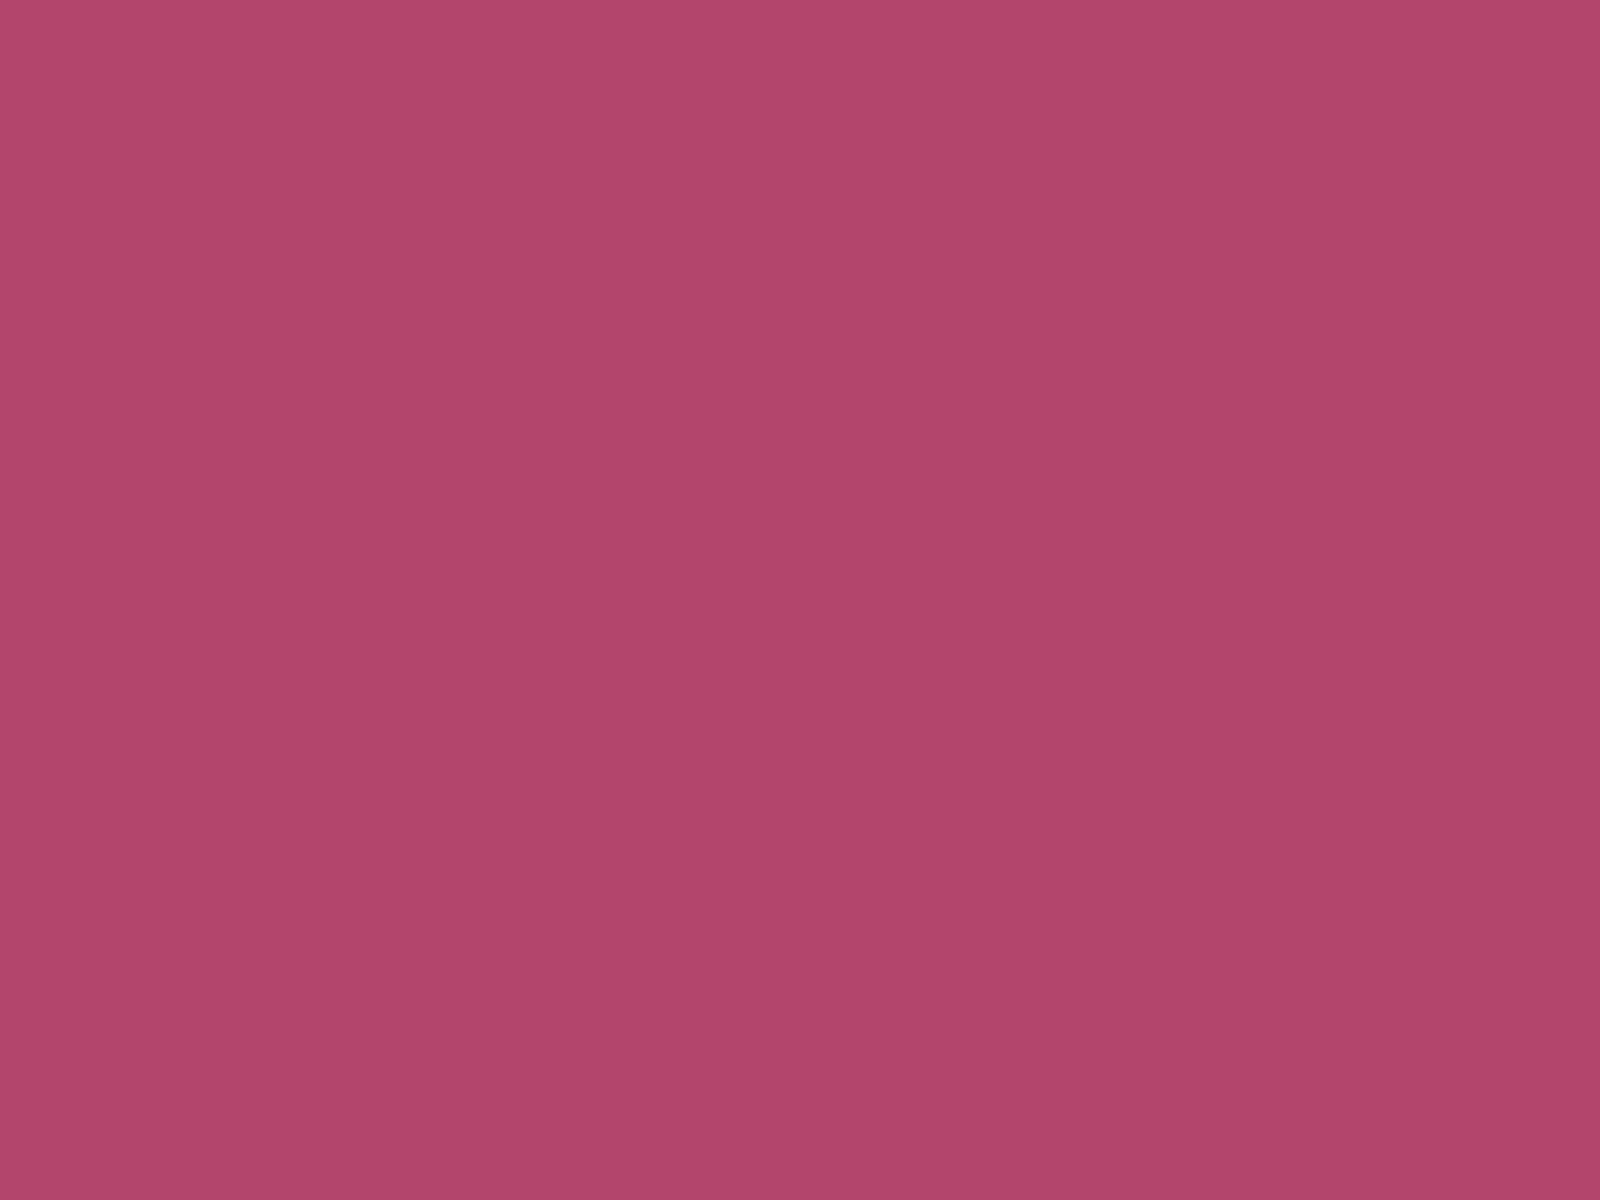 1600x1200 Raspberry Rose Solid Color Background